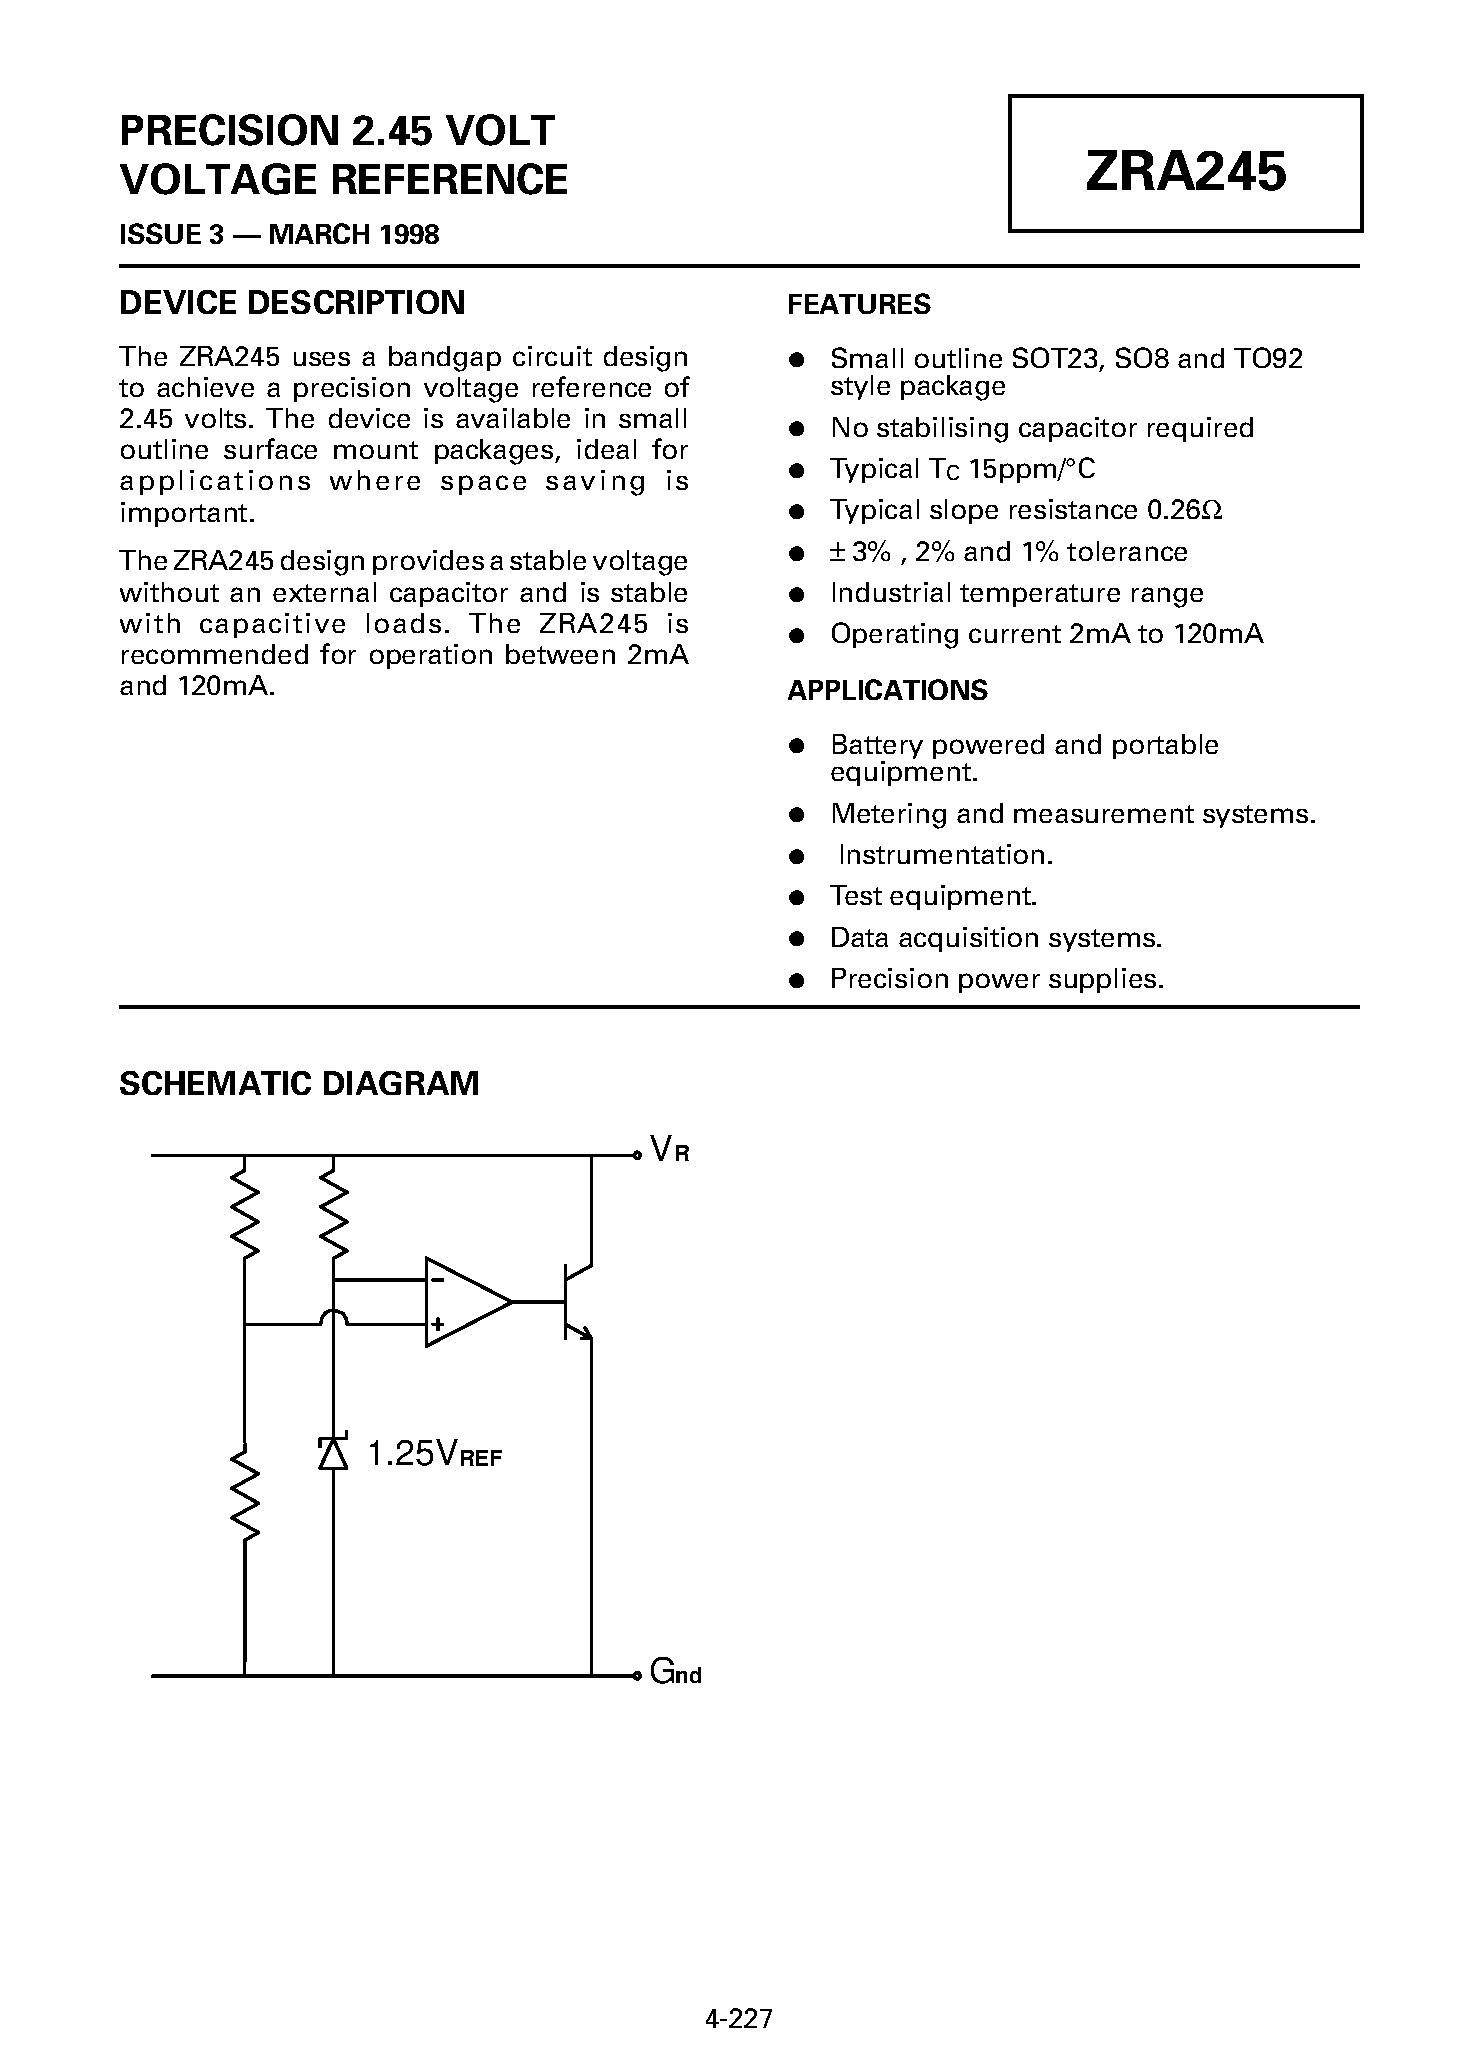 Datasheet ZRA245R02 - PRECISION 2.45 VOLT VOLTAGE REFERENCE page 1